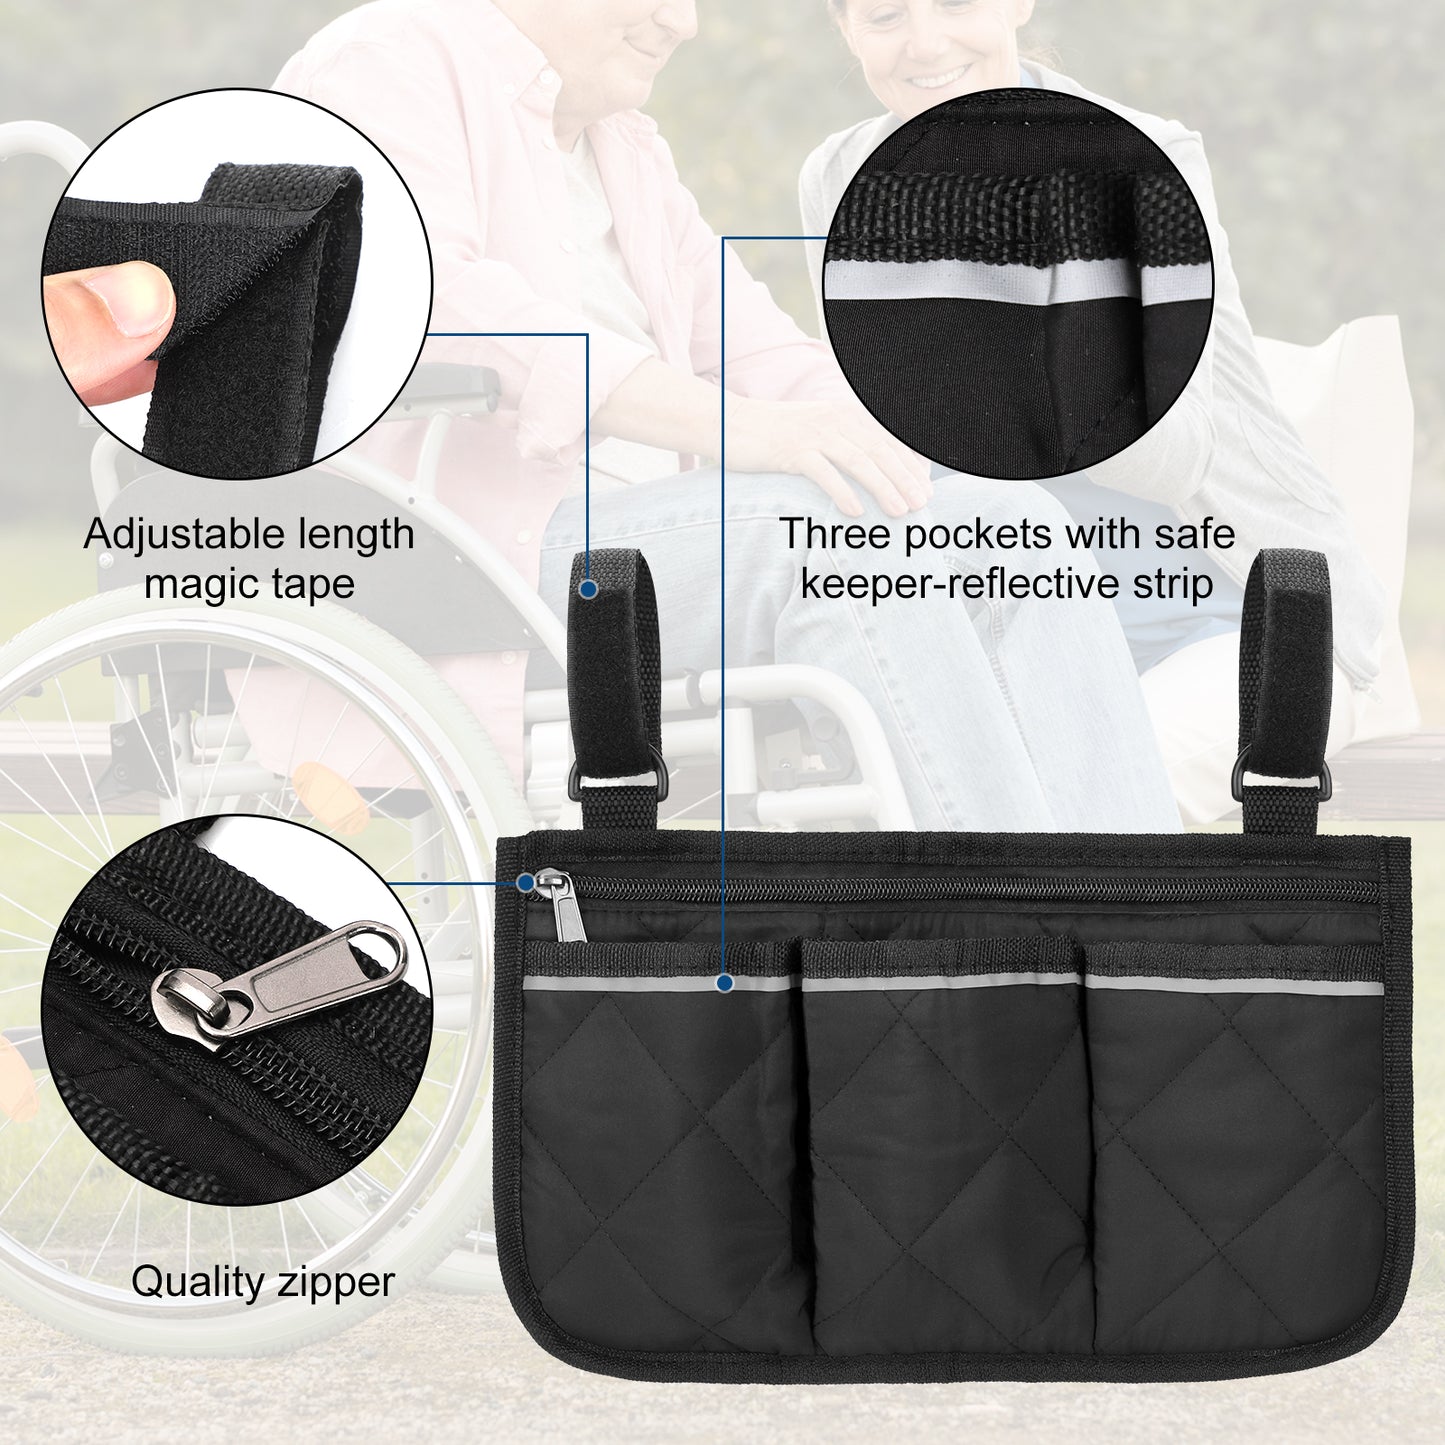 2pcs Wheelchair Side Pouch